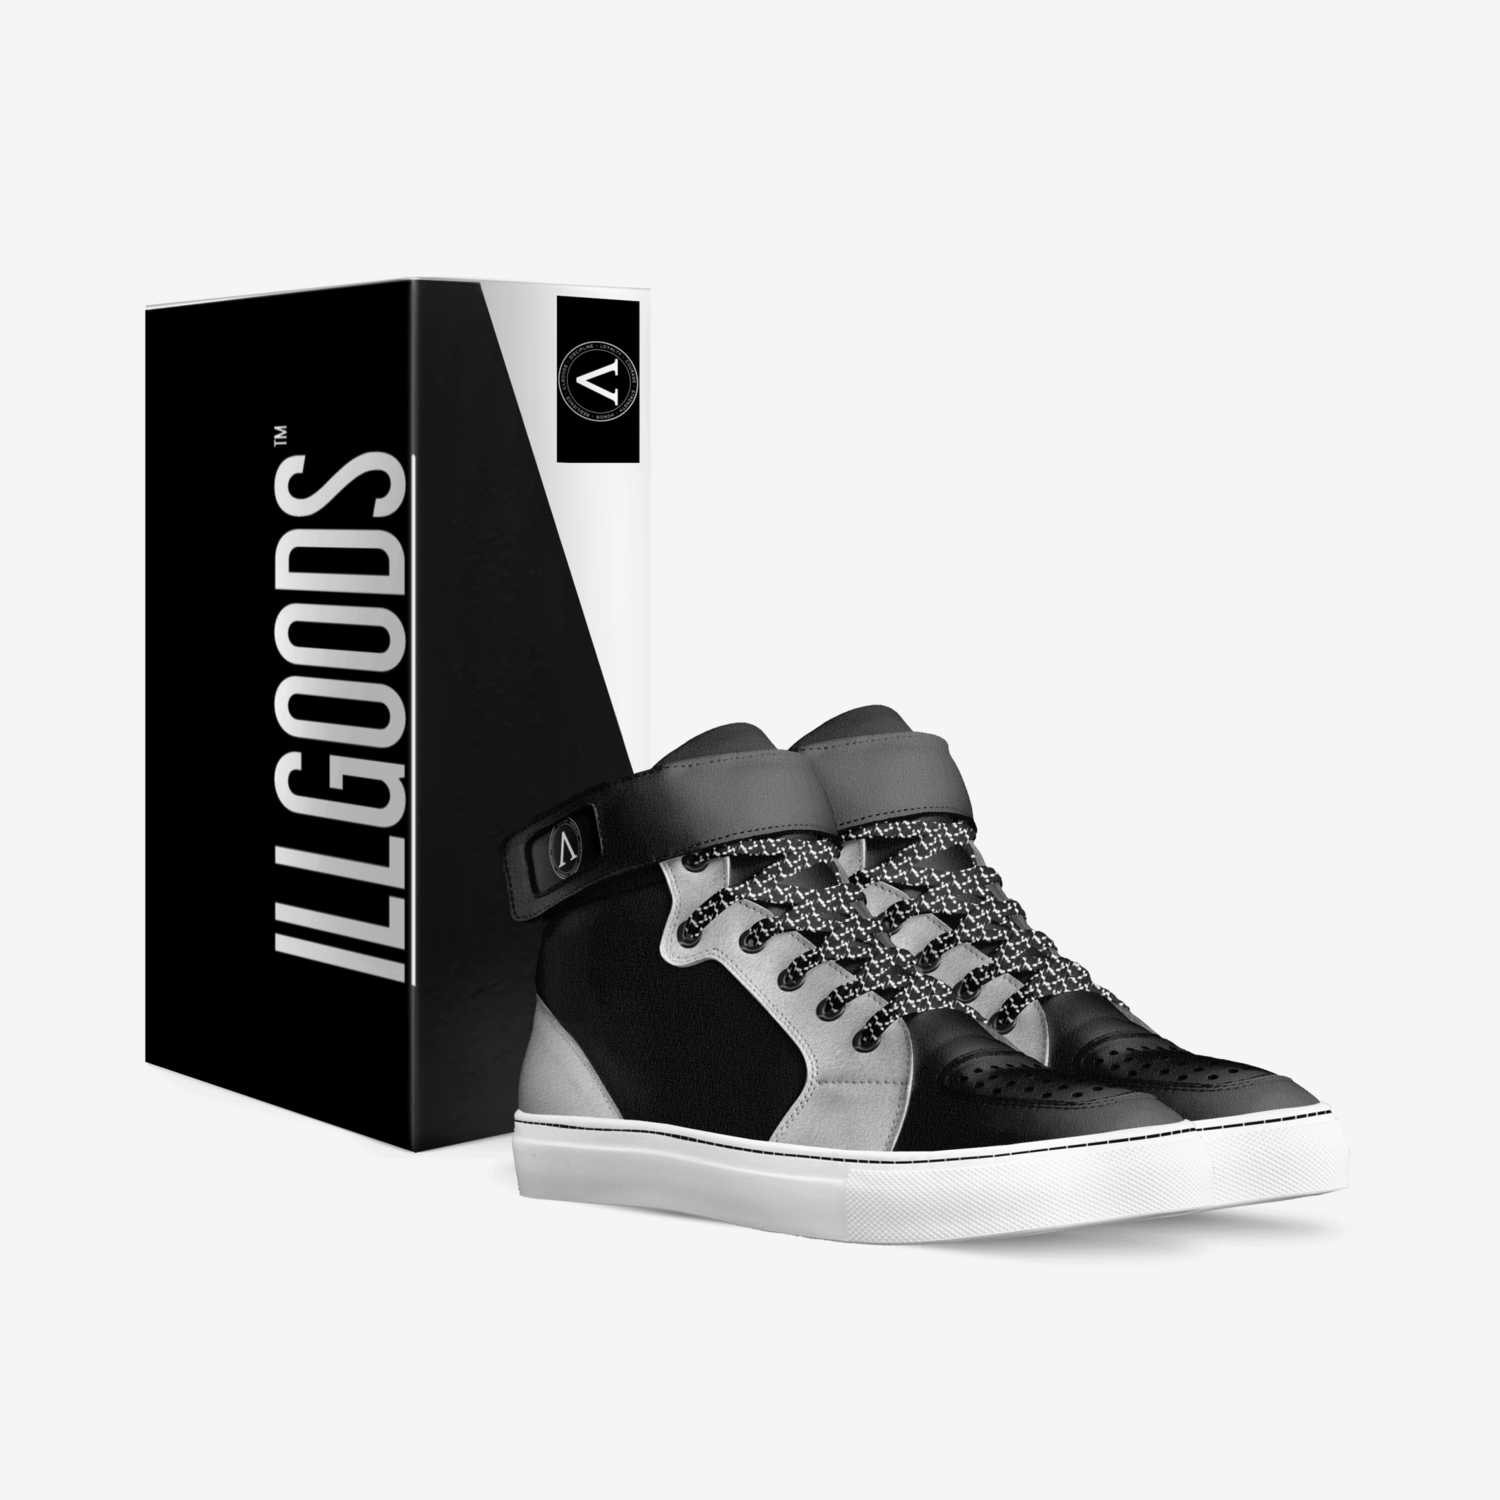 iLLGOODS custom made in Italy shoes by Λge | Box view